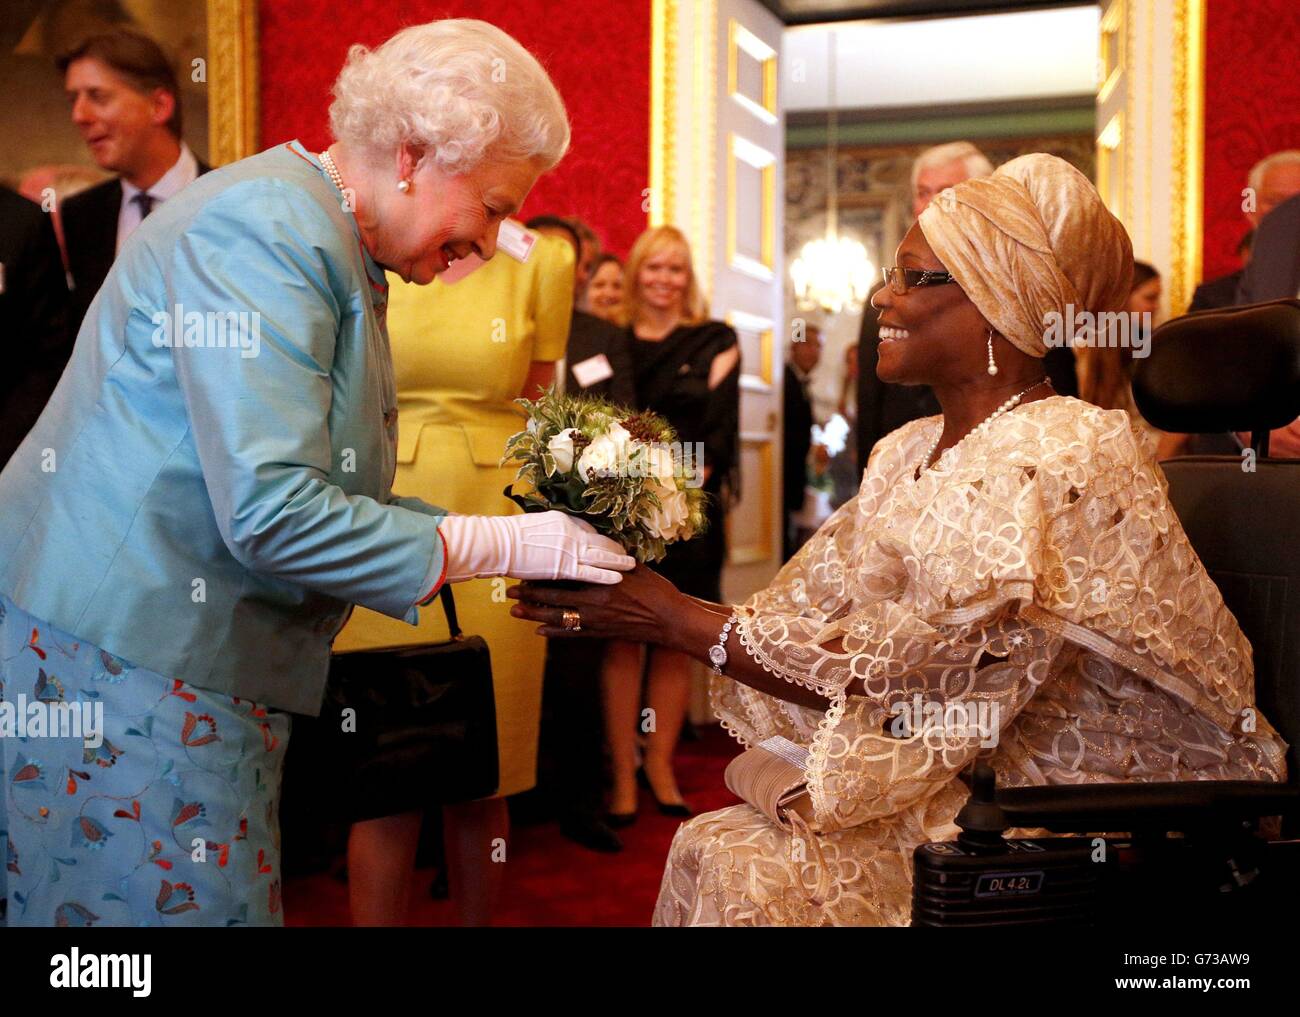 Queen Elizabeth II receives flowers from Veronica Thomas during a reception for Leonard Cheshire Disability in the State Rooms, St James's Palace, London. Stock Photo